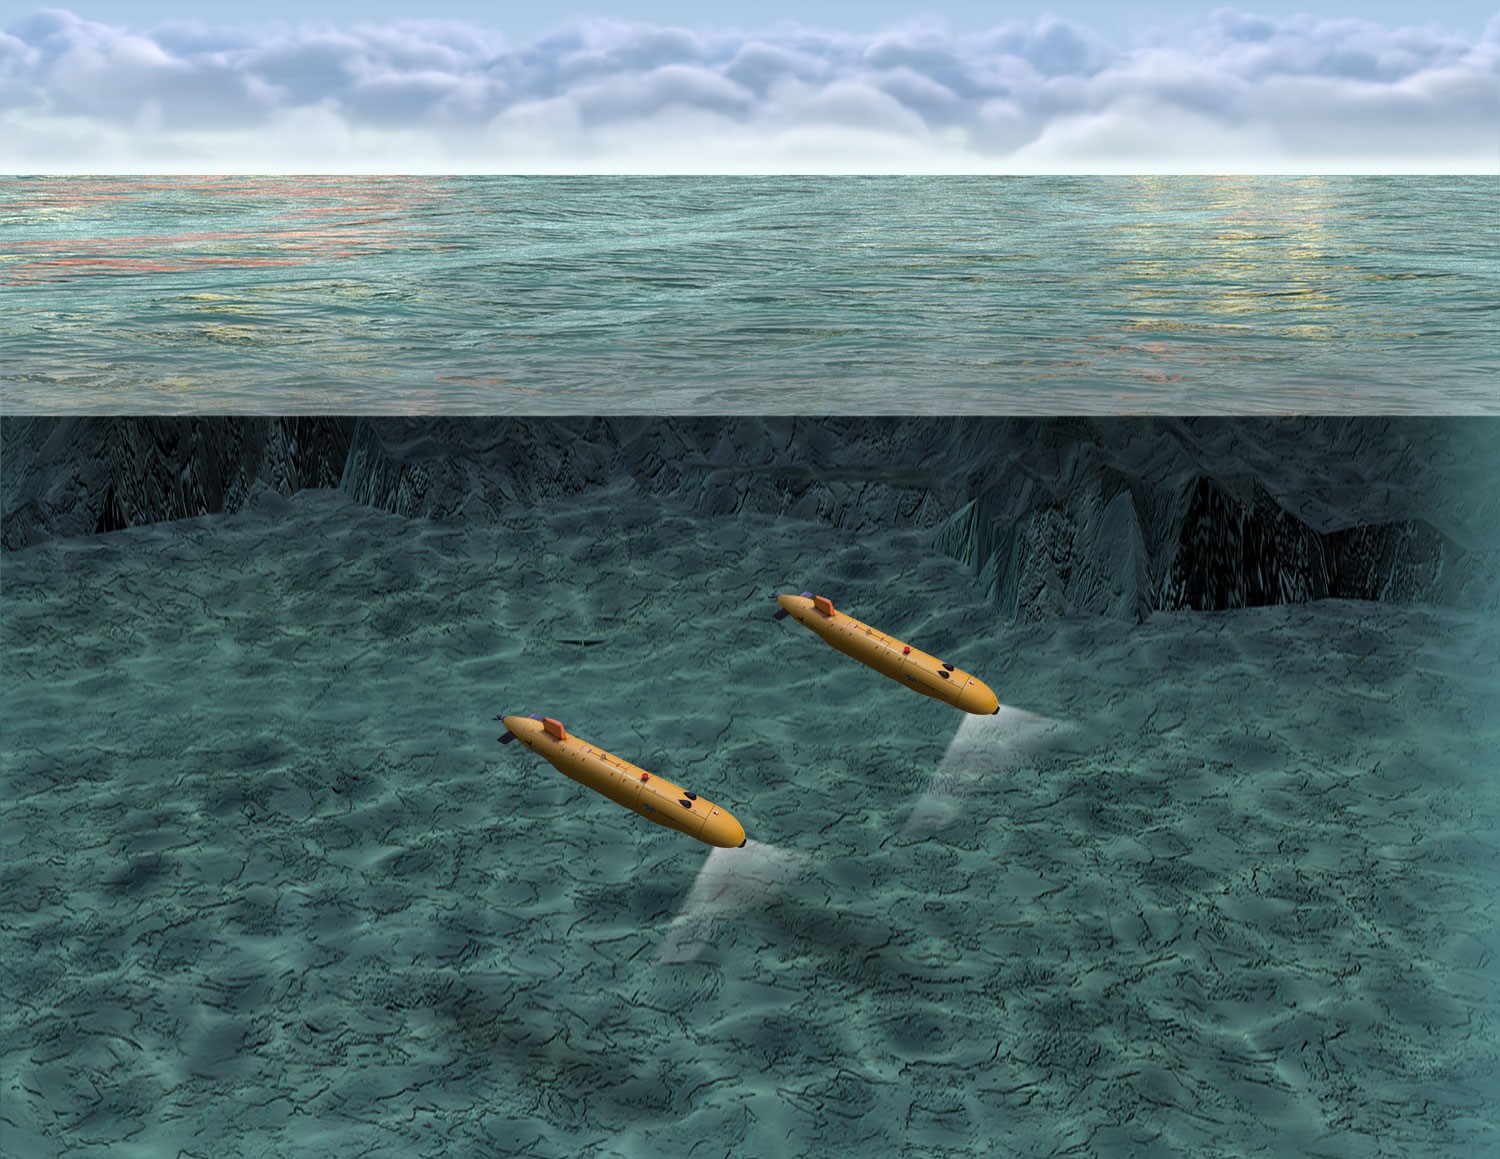 Argeo orders second SeaRaptor AUV from Teledyne